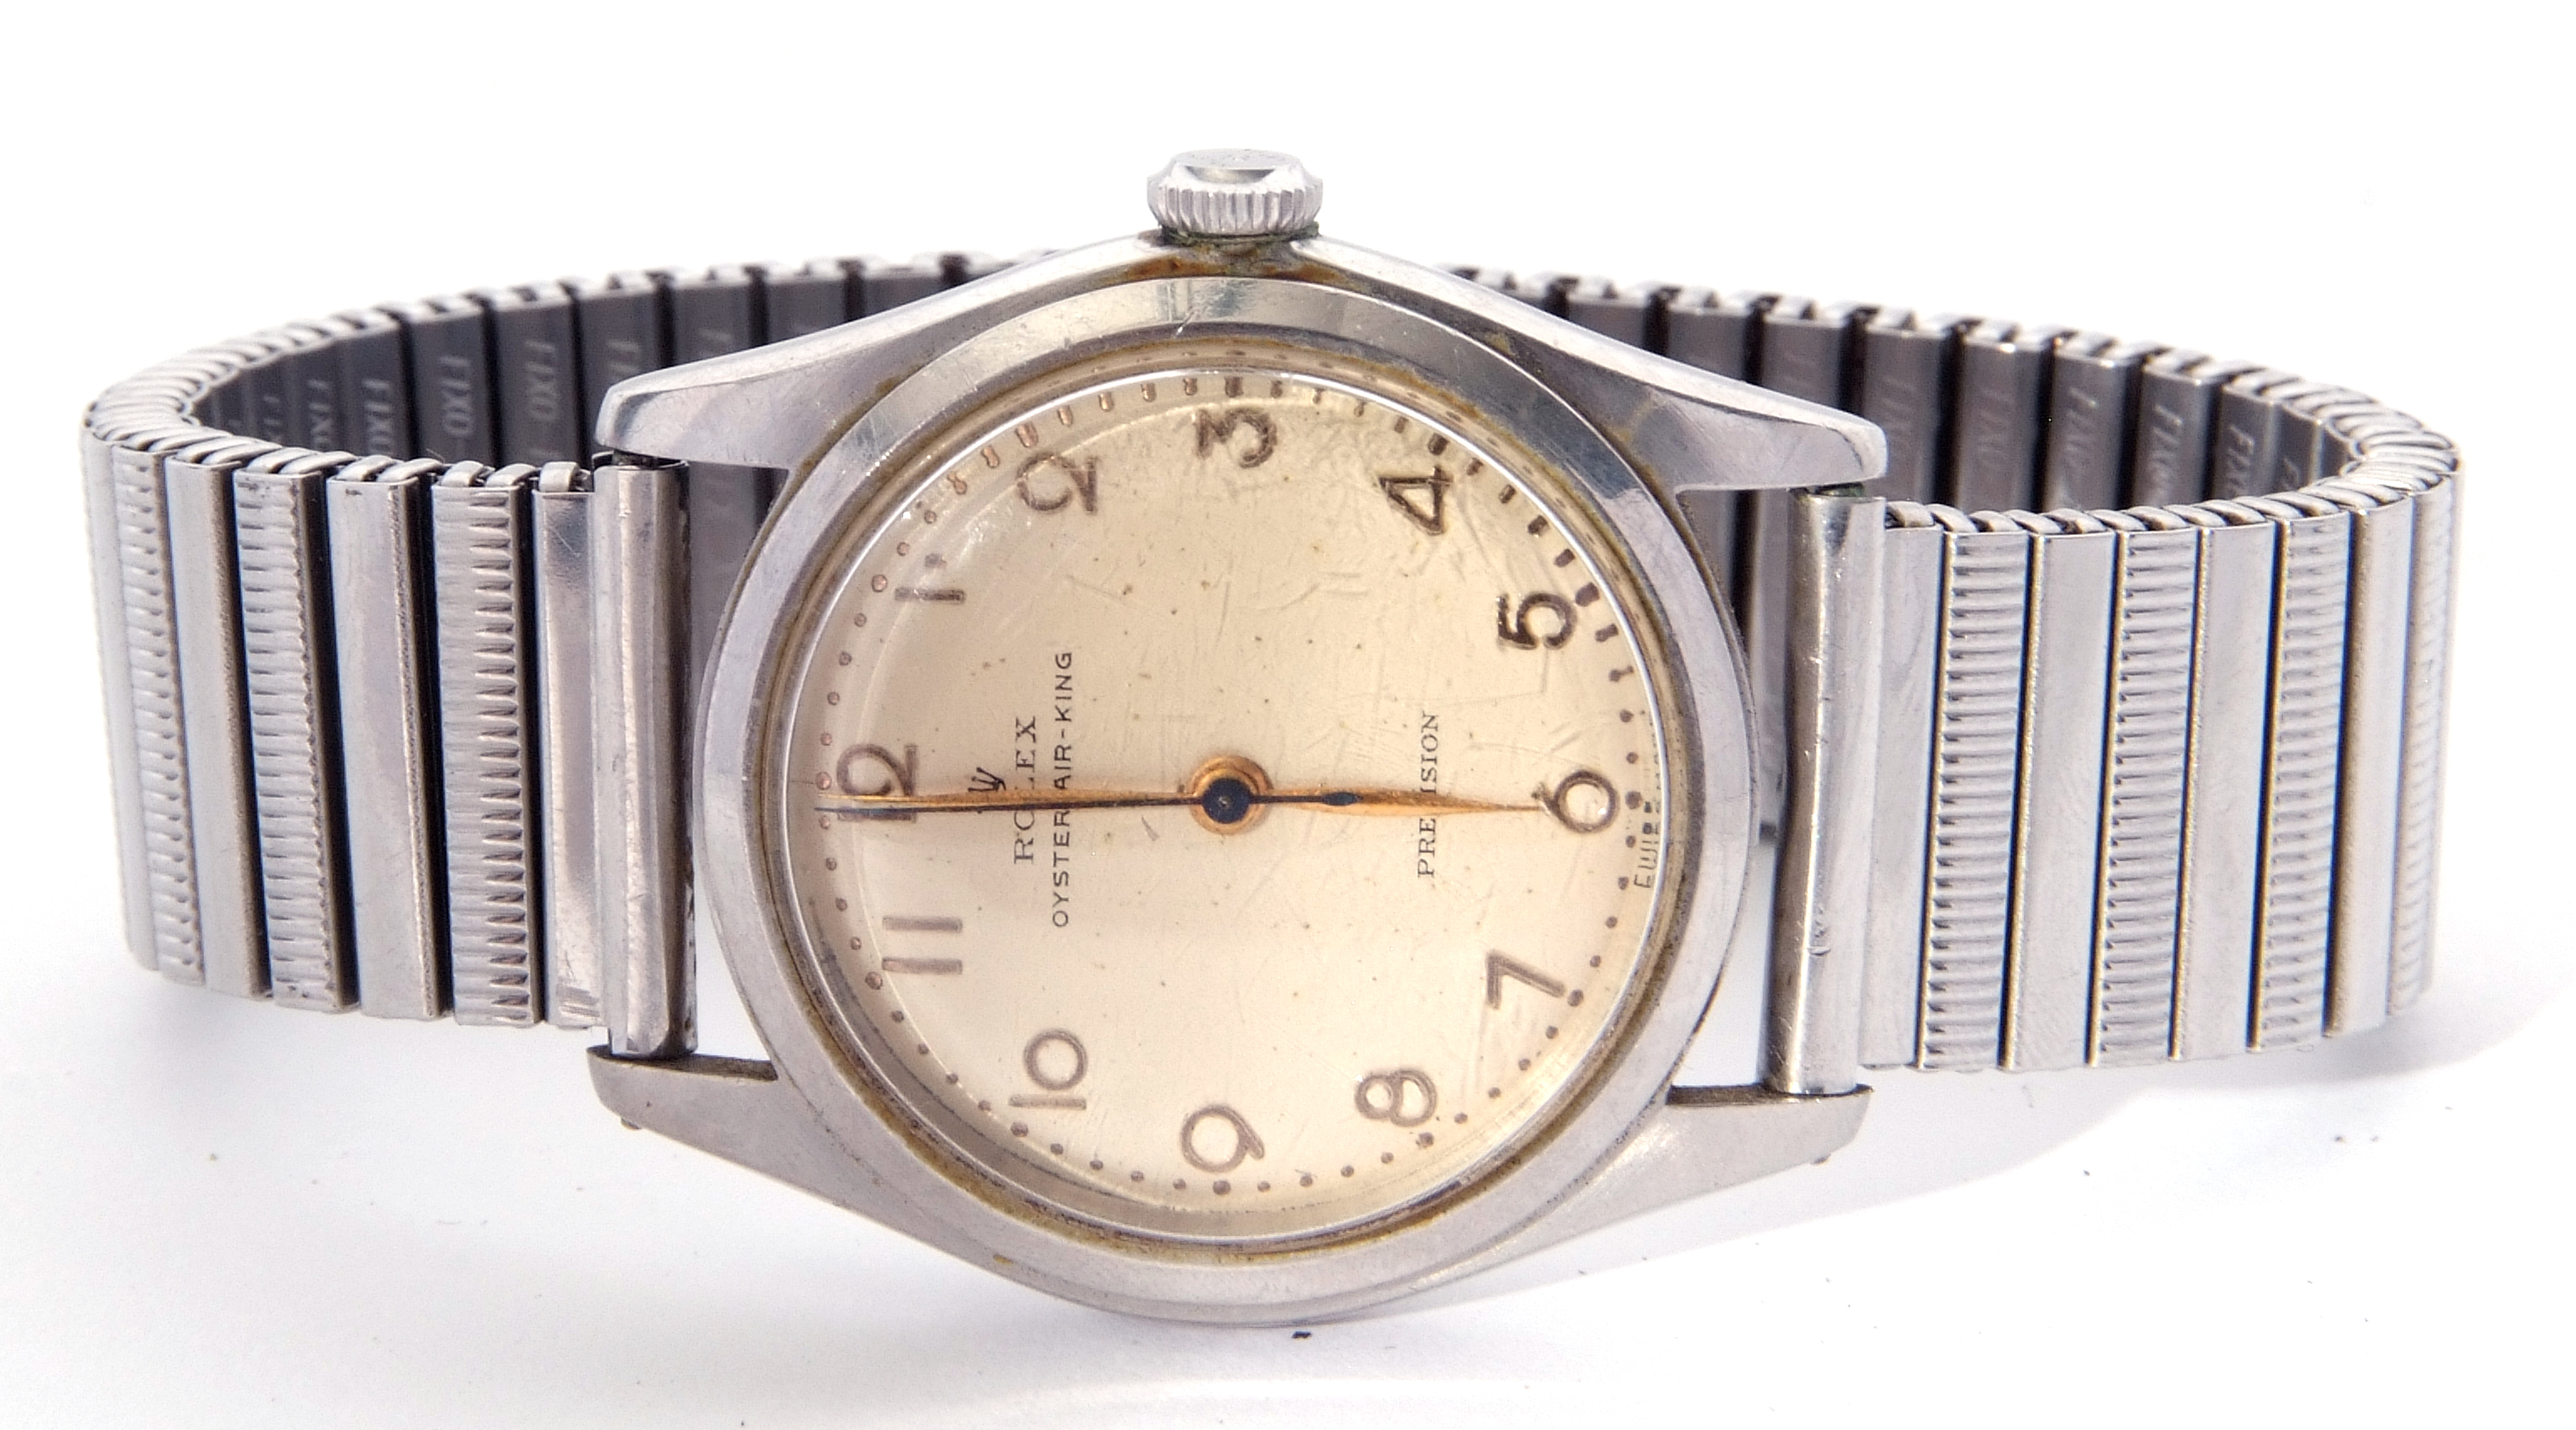 Third quarter of 20th century gents Rolex Oyster Air-King perpetual wrist watch with stainless steel - Image 3 of 7